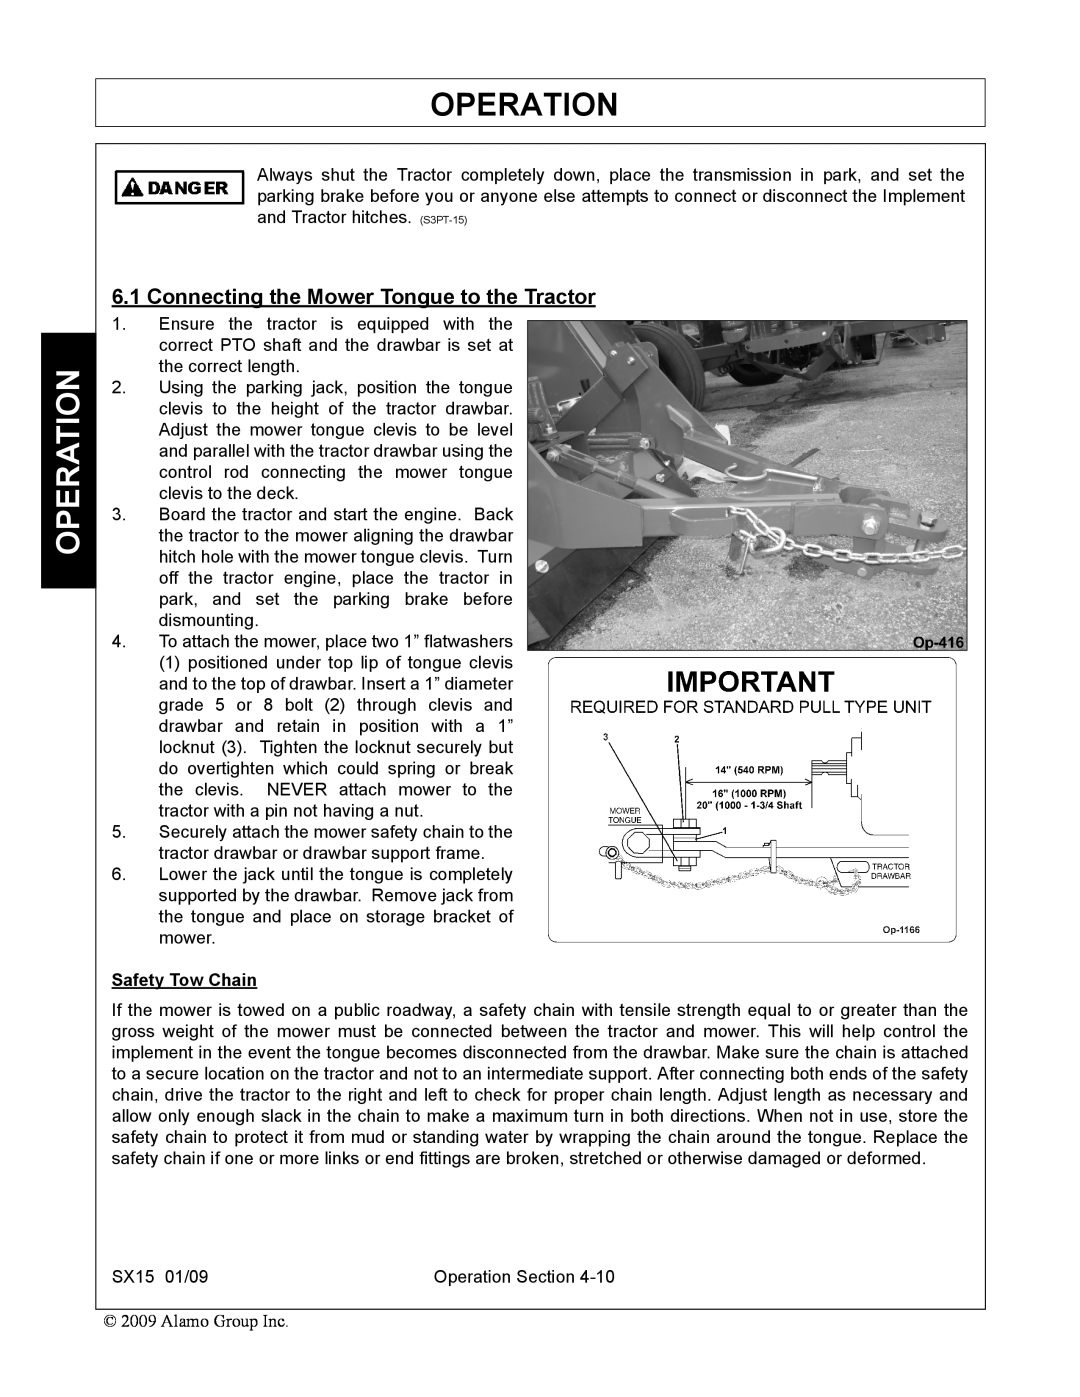 Alamo SX15 manual Connecting the Mower Tongue to the Tractor, Operation, Safety Tow Chain 